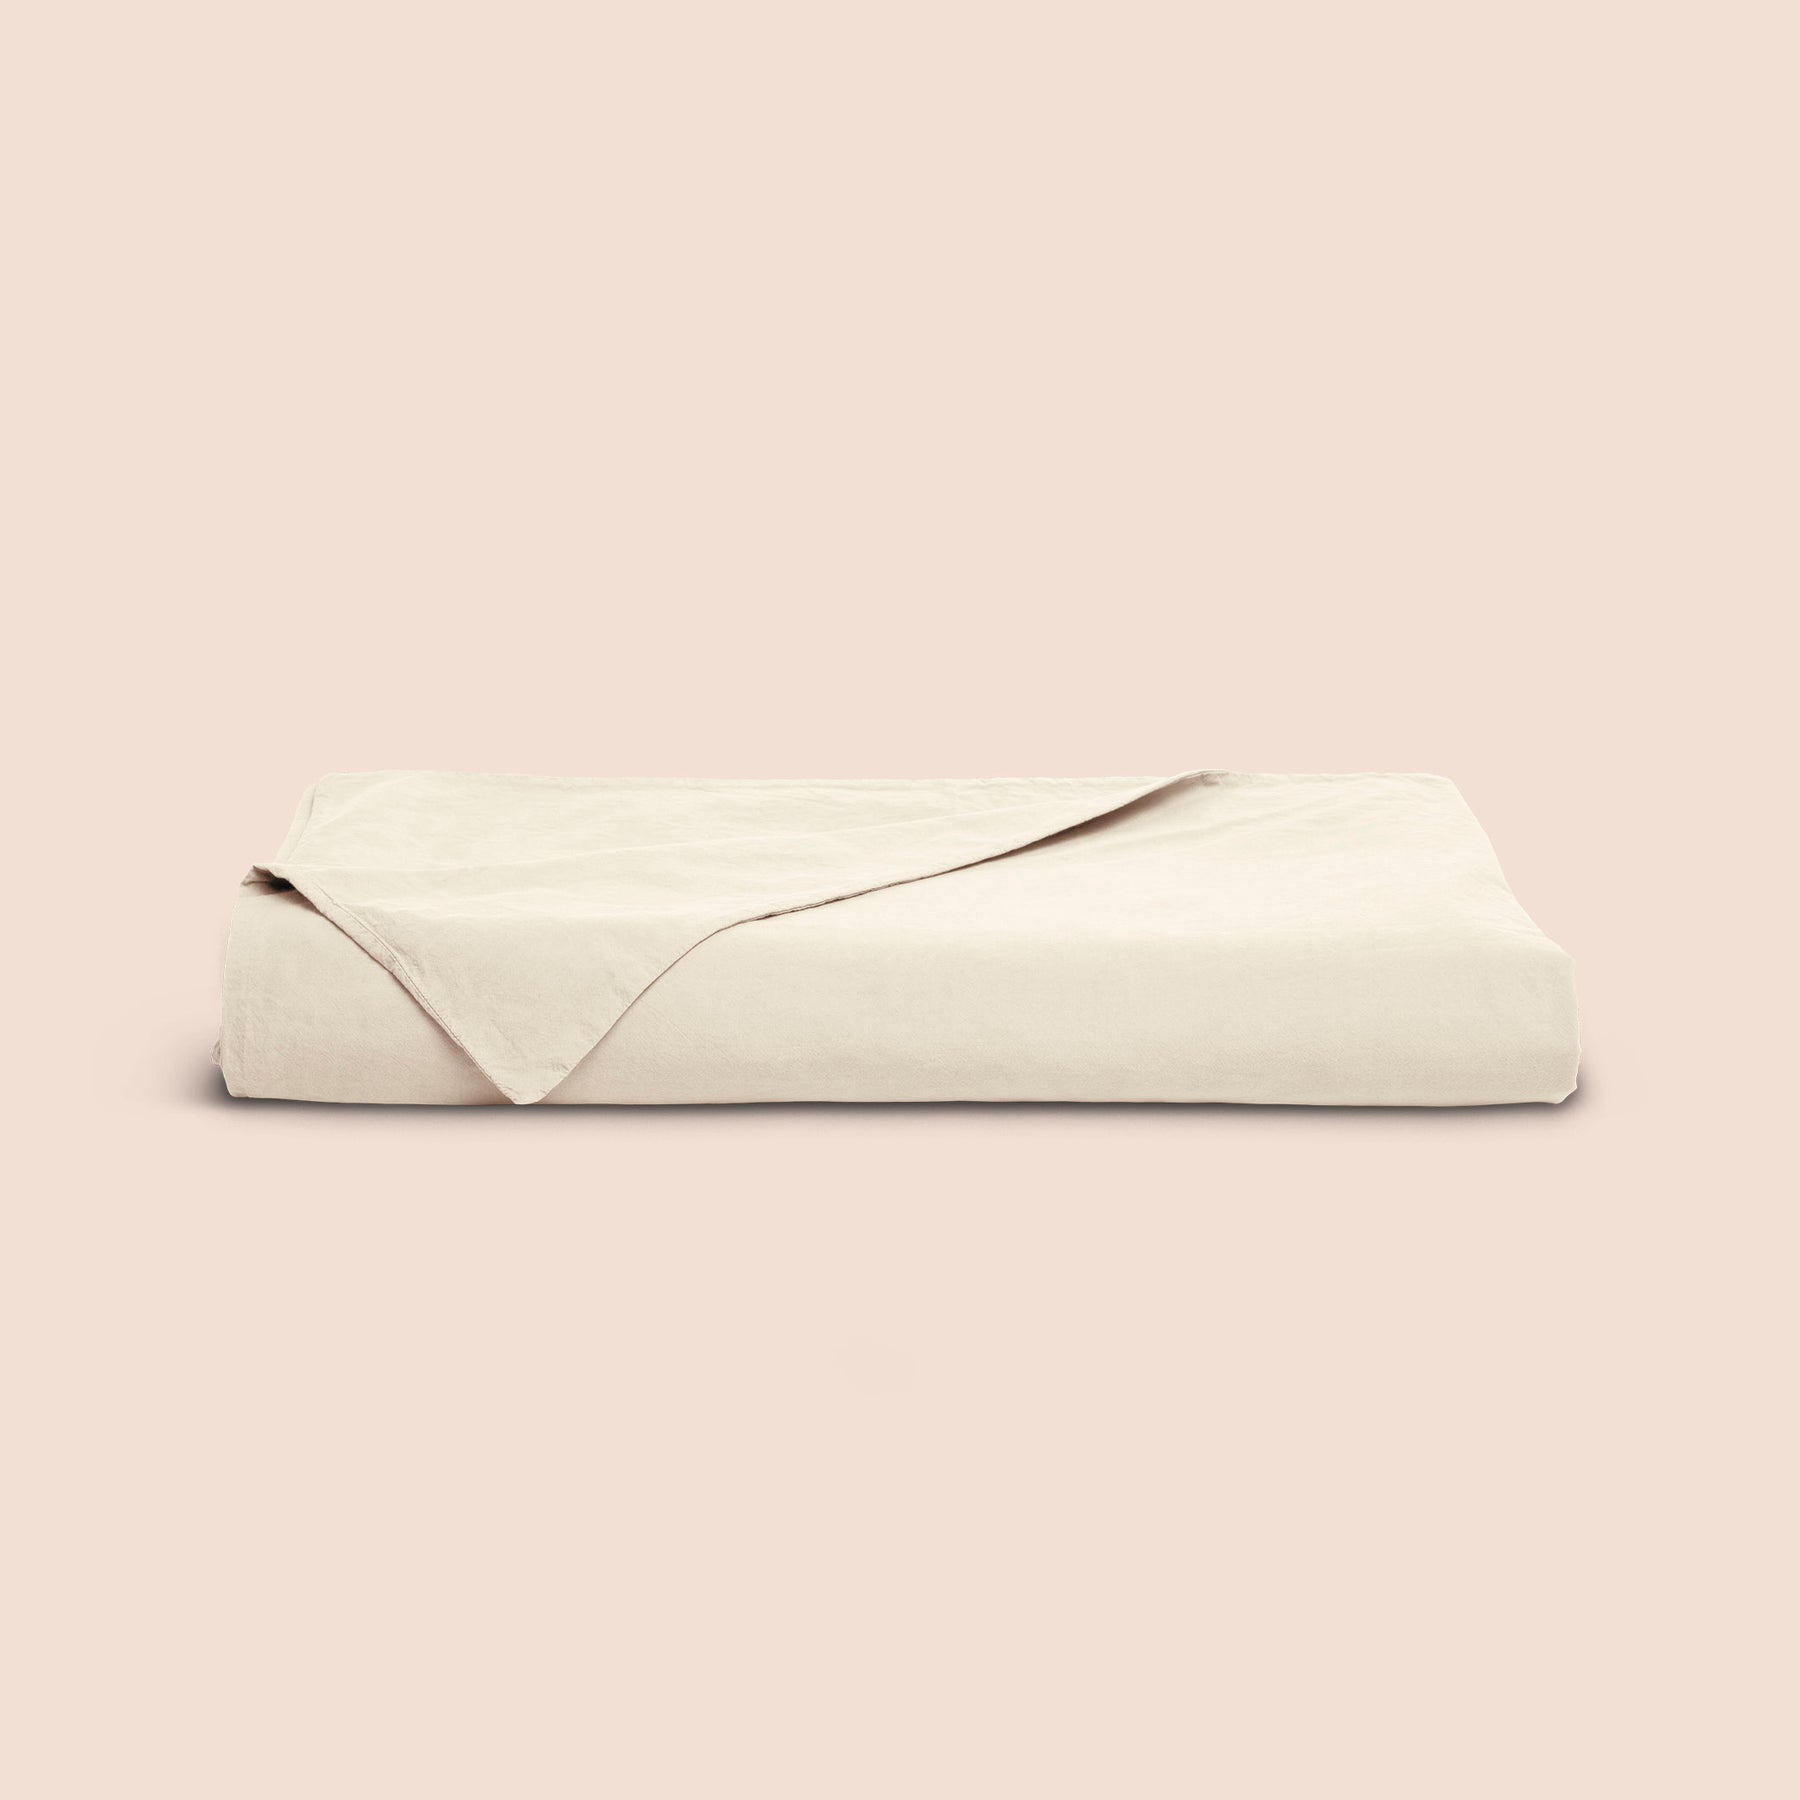 Image of an Ecru Garment Washed Percale Duvet Cover neatly folded with one corner draped towards the front on a light pink background